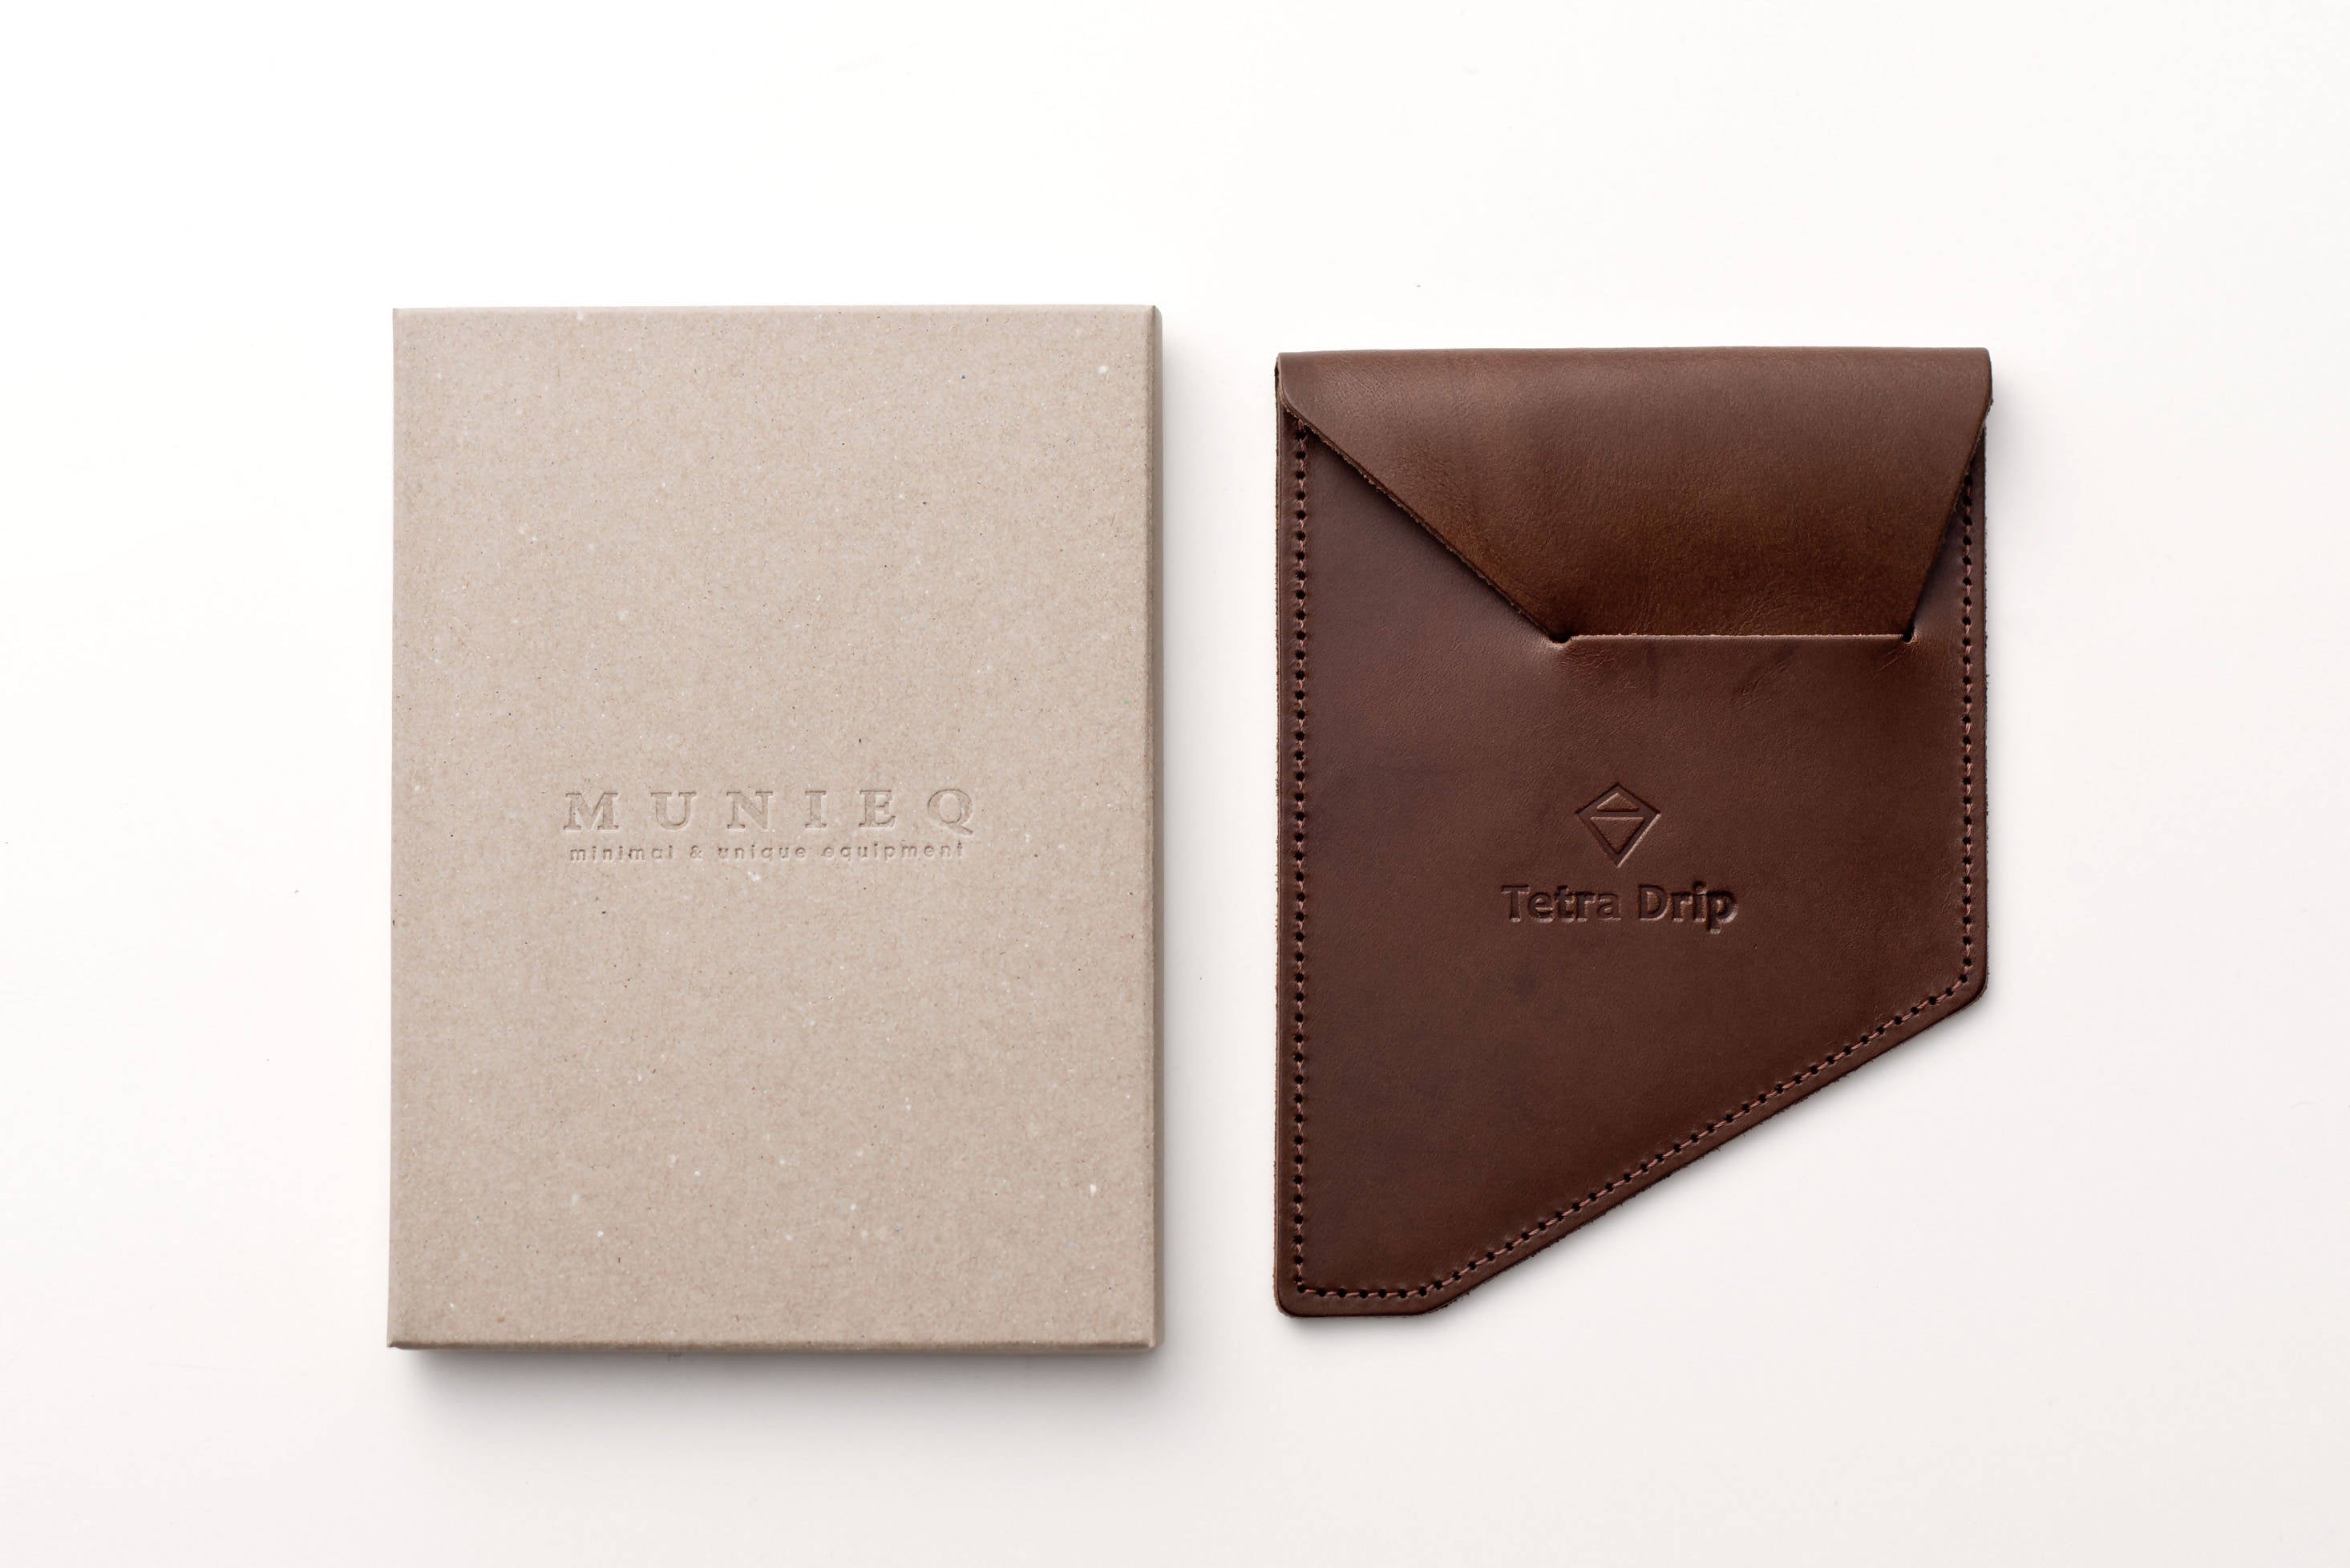 { MADE IN JAPAN } MUNIEQ SS 02 Tetra Drip Stainless Steel with Leather Pouch - BUNAMARKET